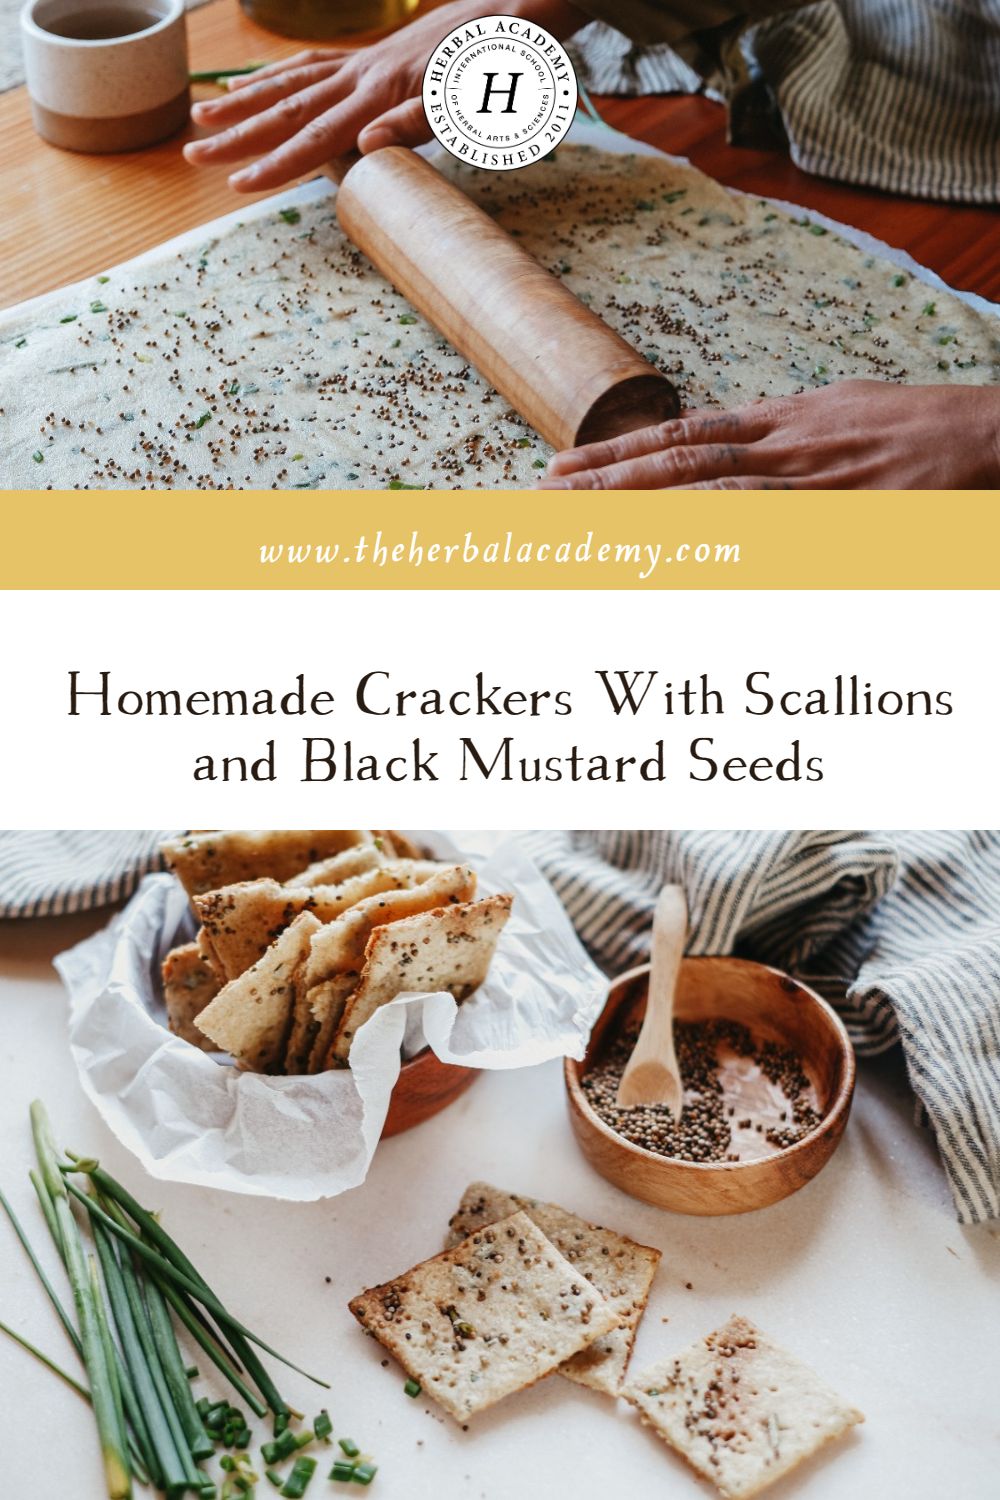 Homemade Crackers With Scallions and Black Mustard Seeds | Herbal Academy | Impress your family and friends with these flavorful homemade crackers the next time you are hosting or attending a gathering!